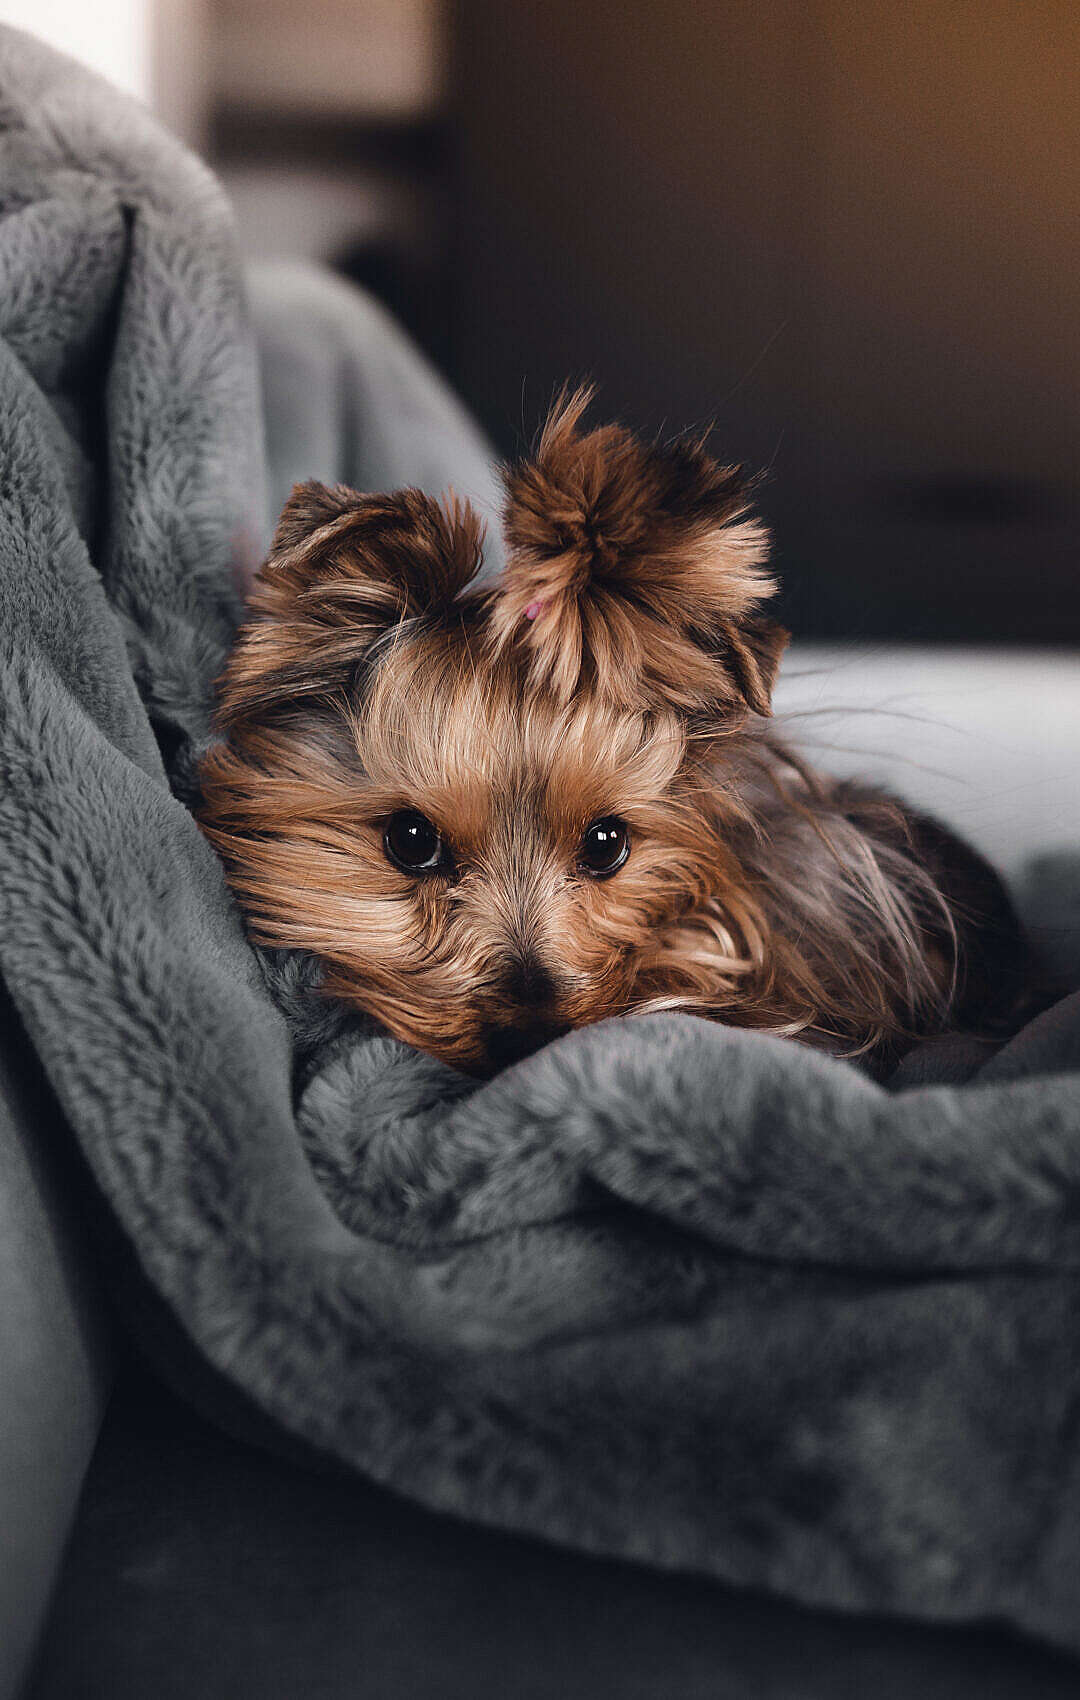 Download Our Yorkshire Terrier Jessie is Giving Her Cute Look FREE Stock Photo